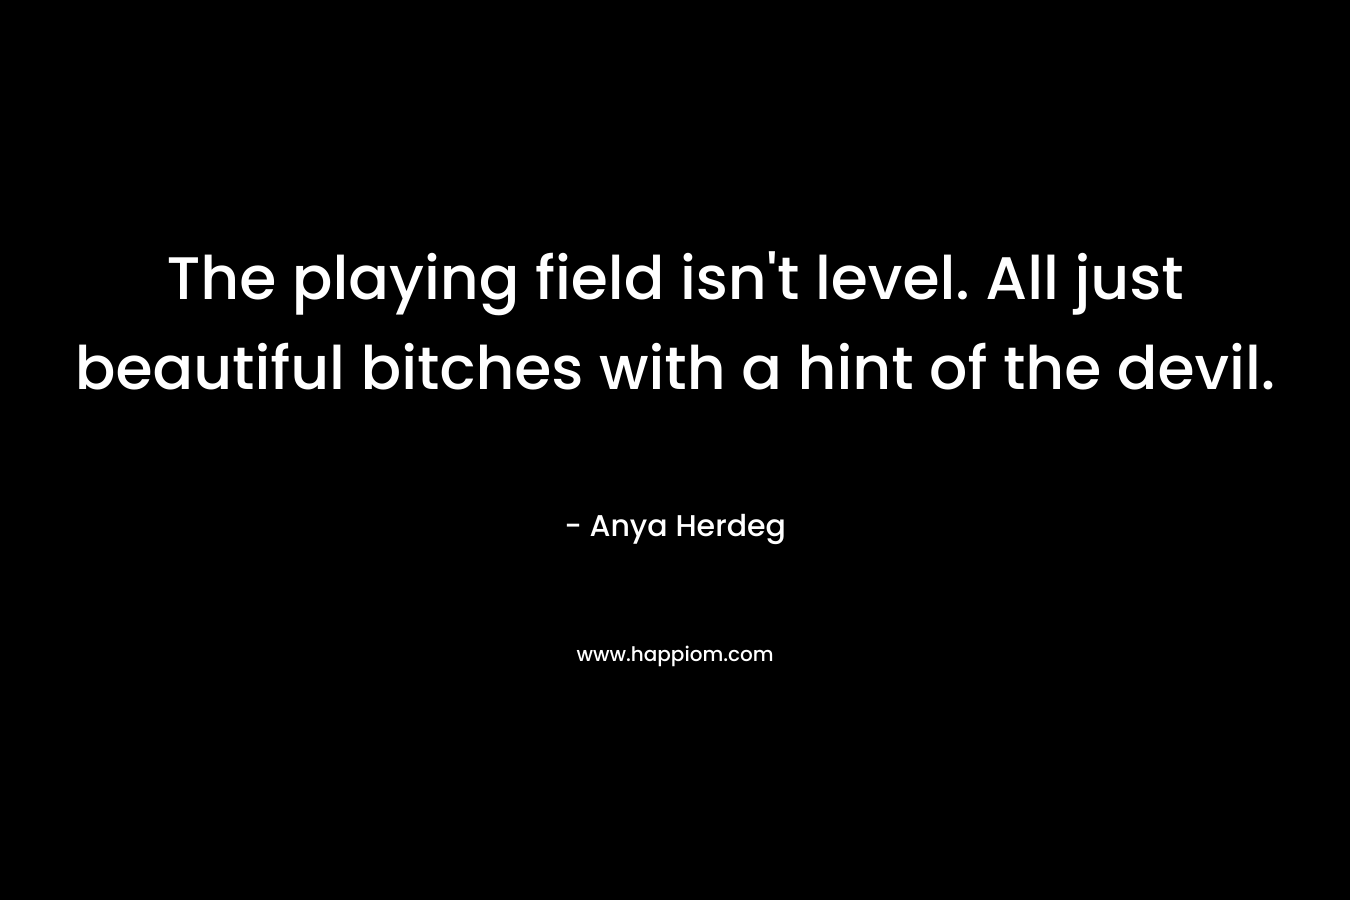 The playing field isn’t level. All just beautiful bitches with a hint of the devil. – Anya Herdeg